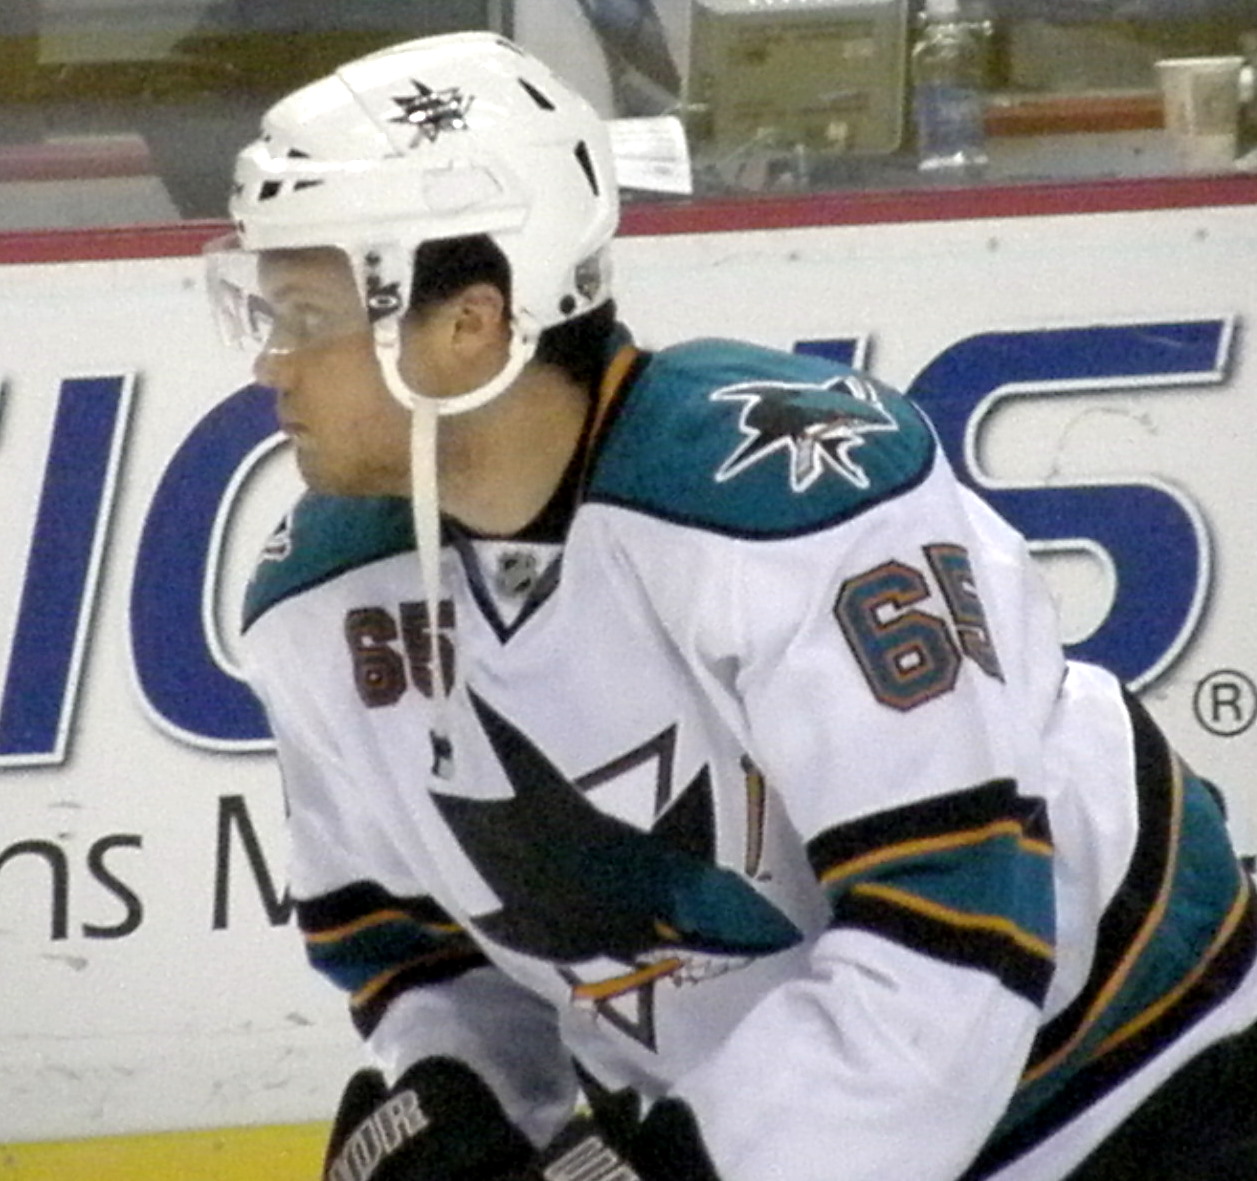 a man wearing a white hockey jersey and a helmet